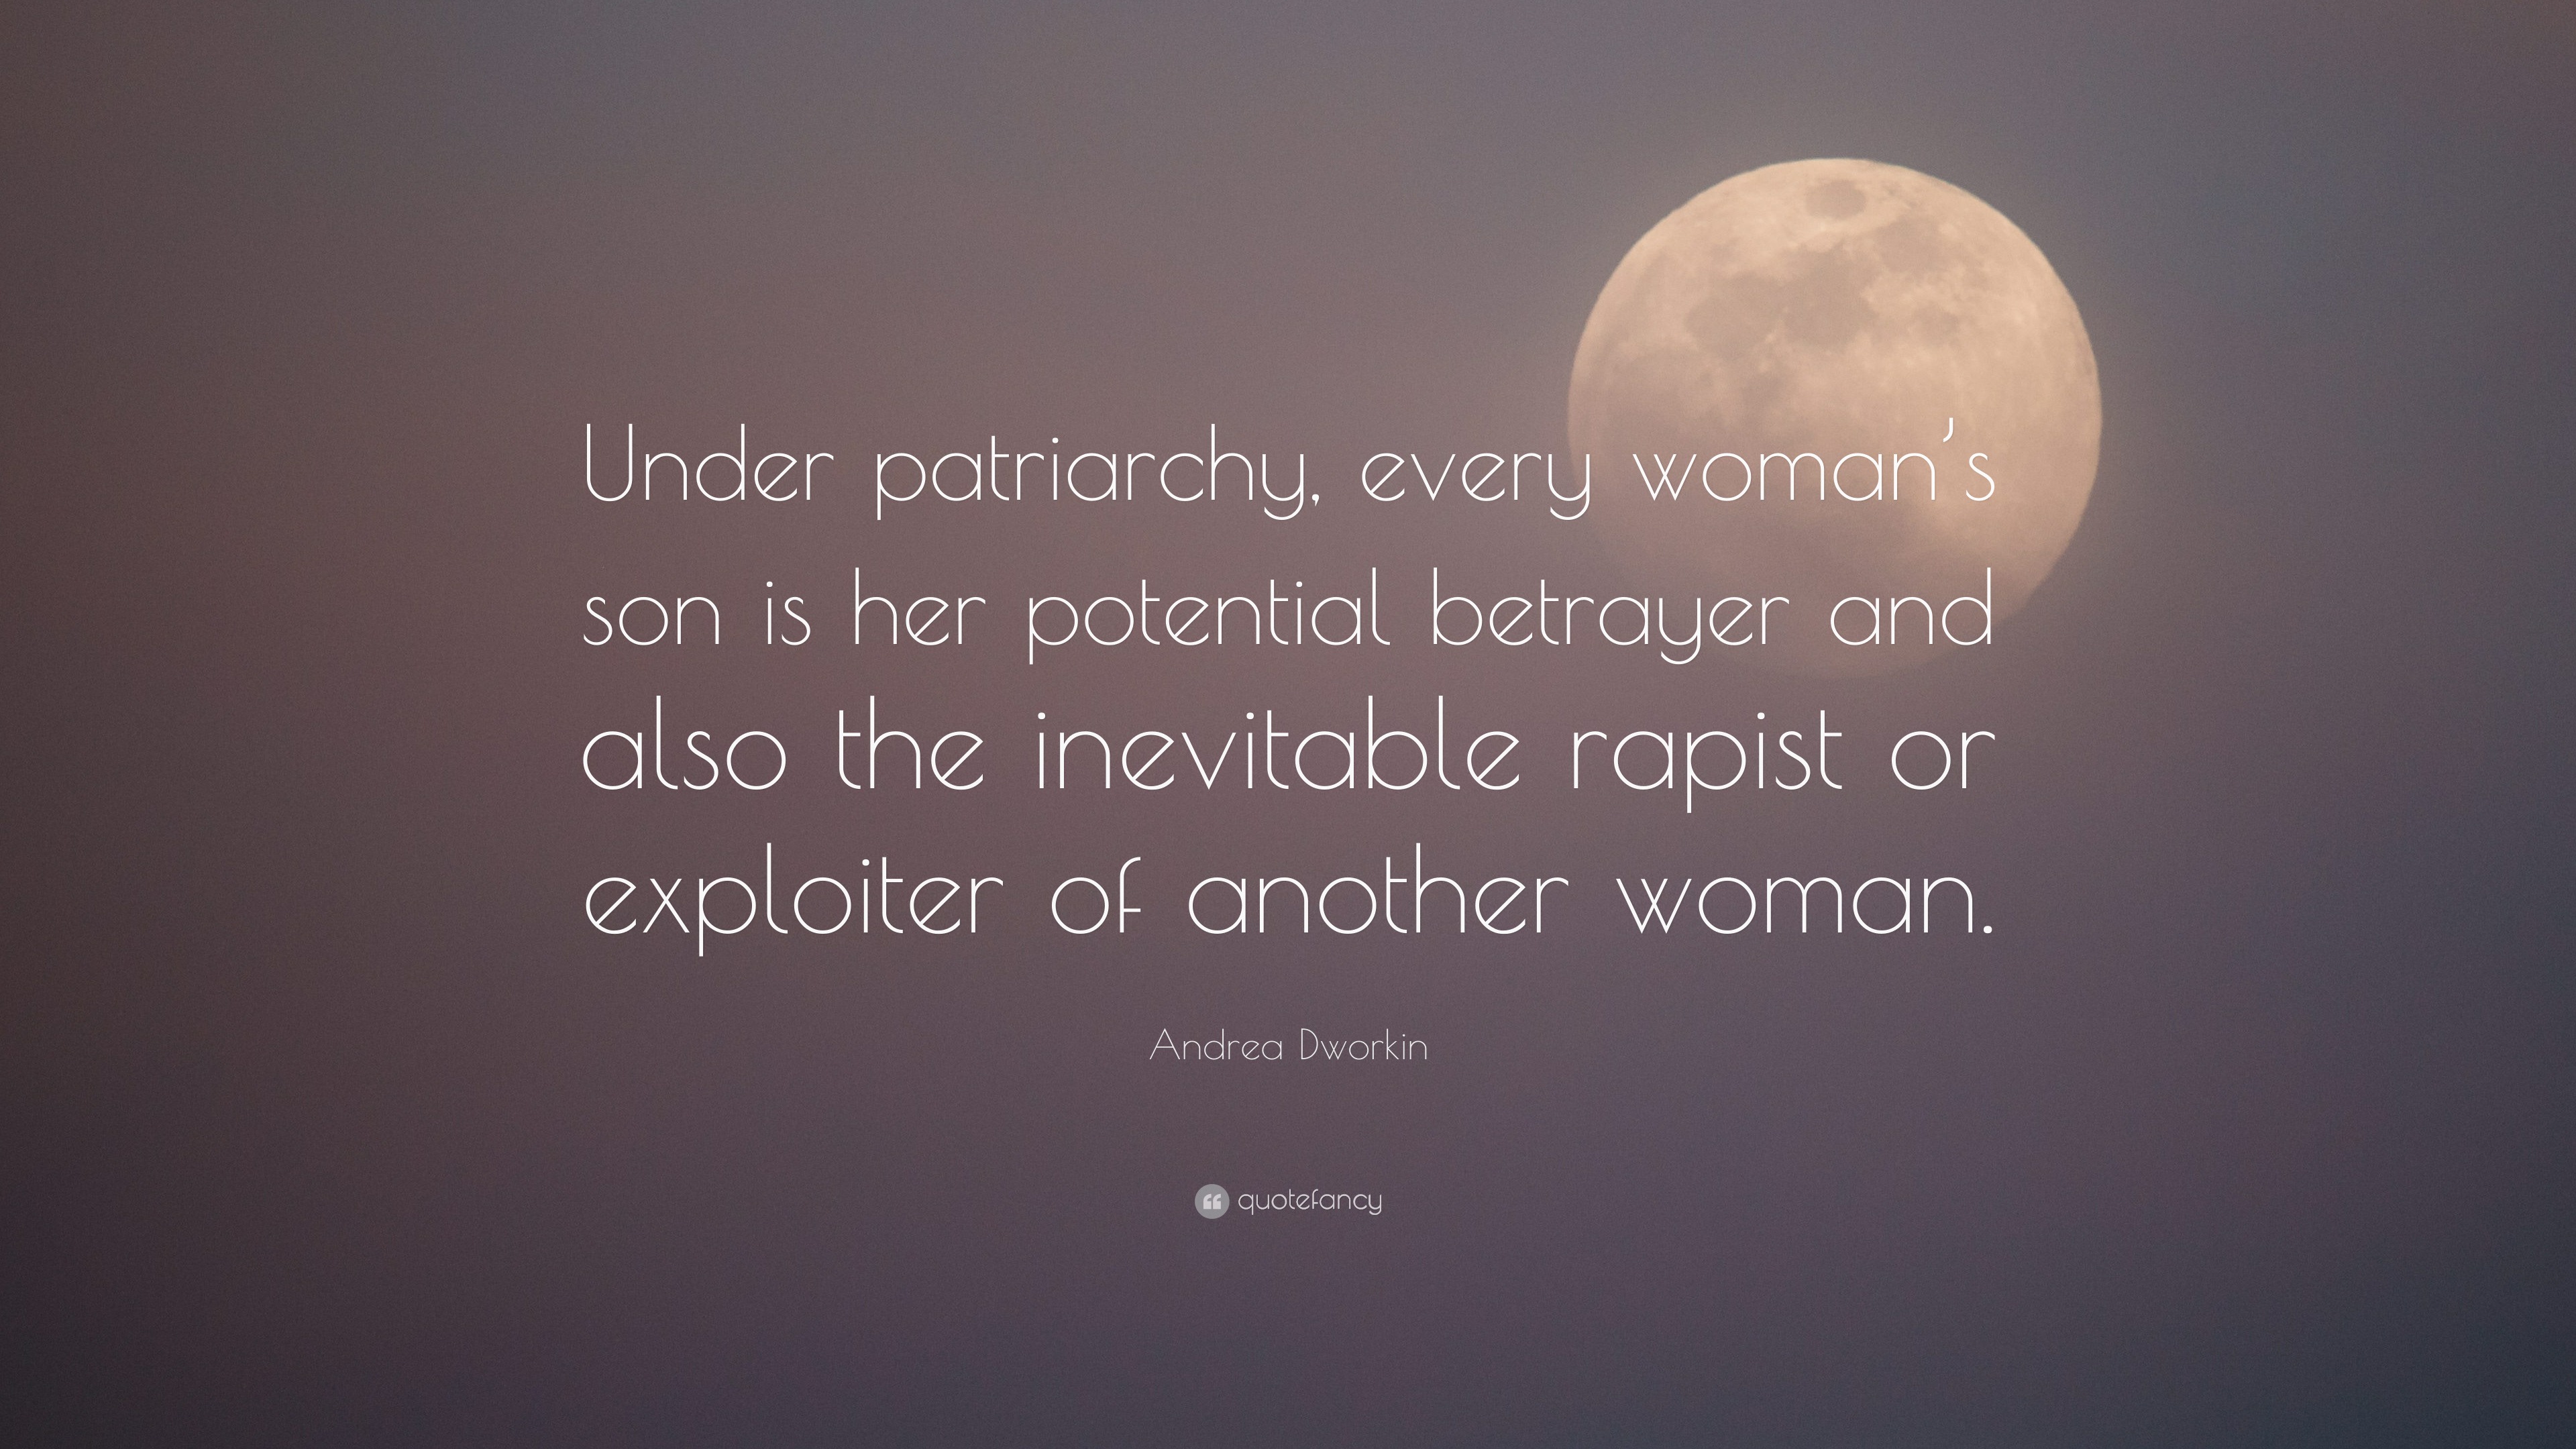 Andrea Dworkin Quote: “Under patriarchy, every woman's son is her potential  betrayer and also the inevitable rapist or exploiter of another wom”